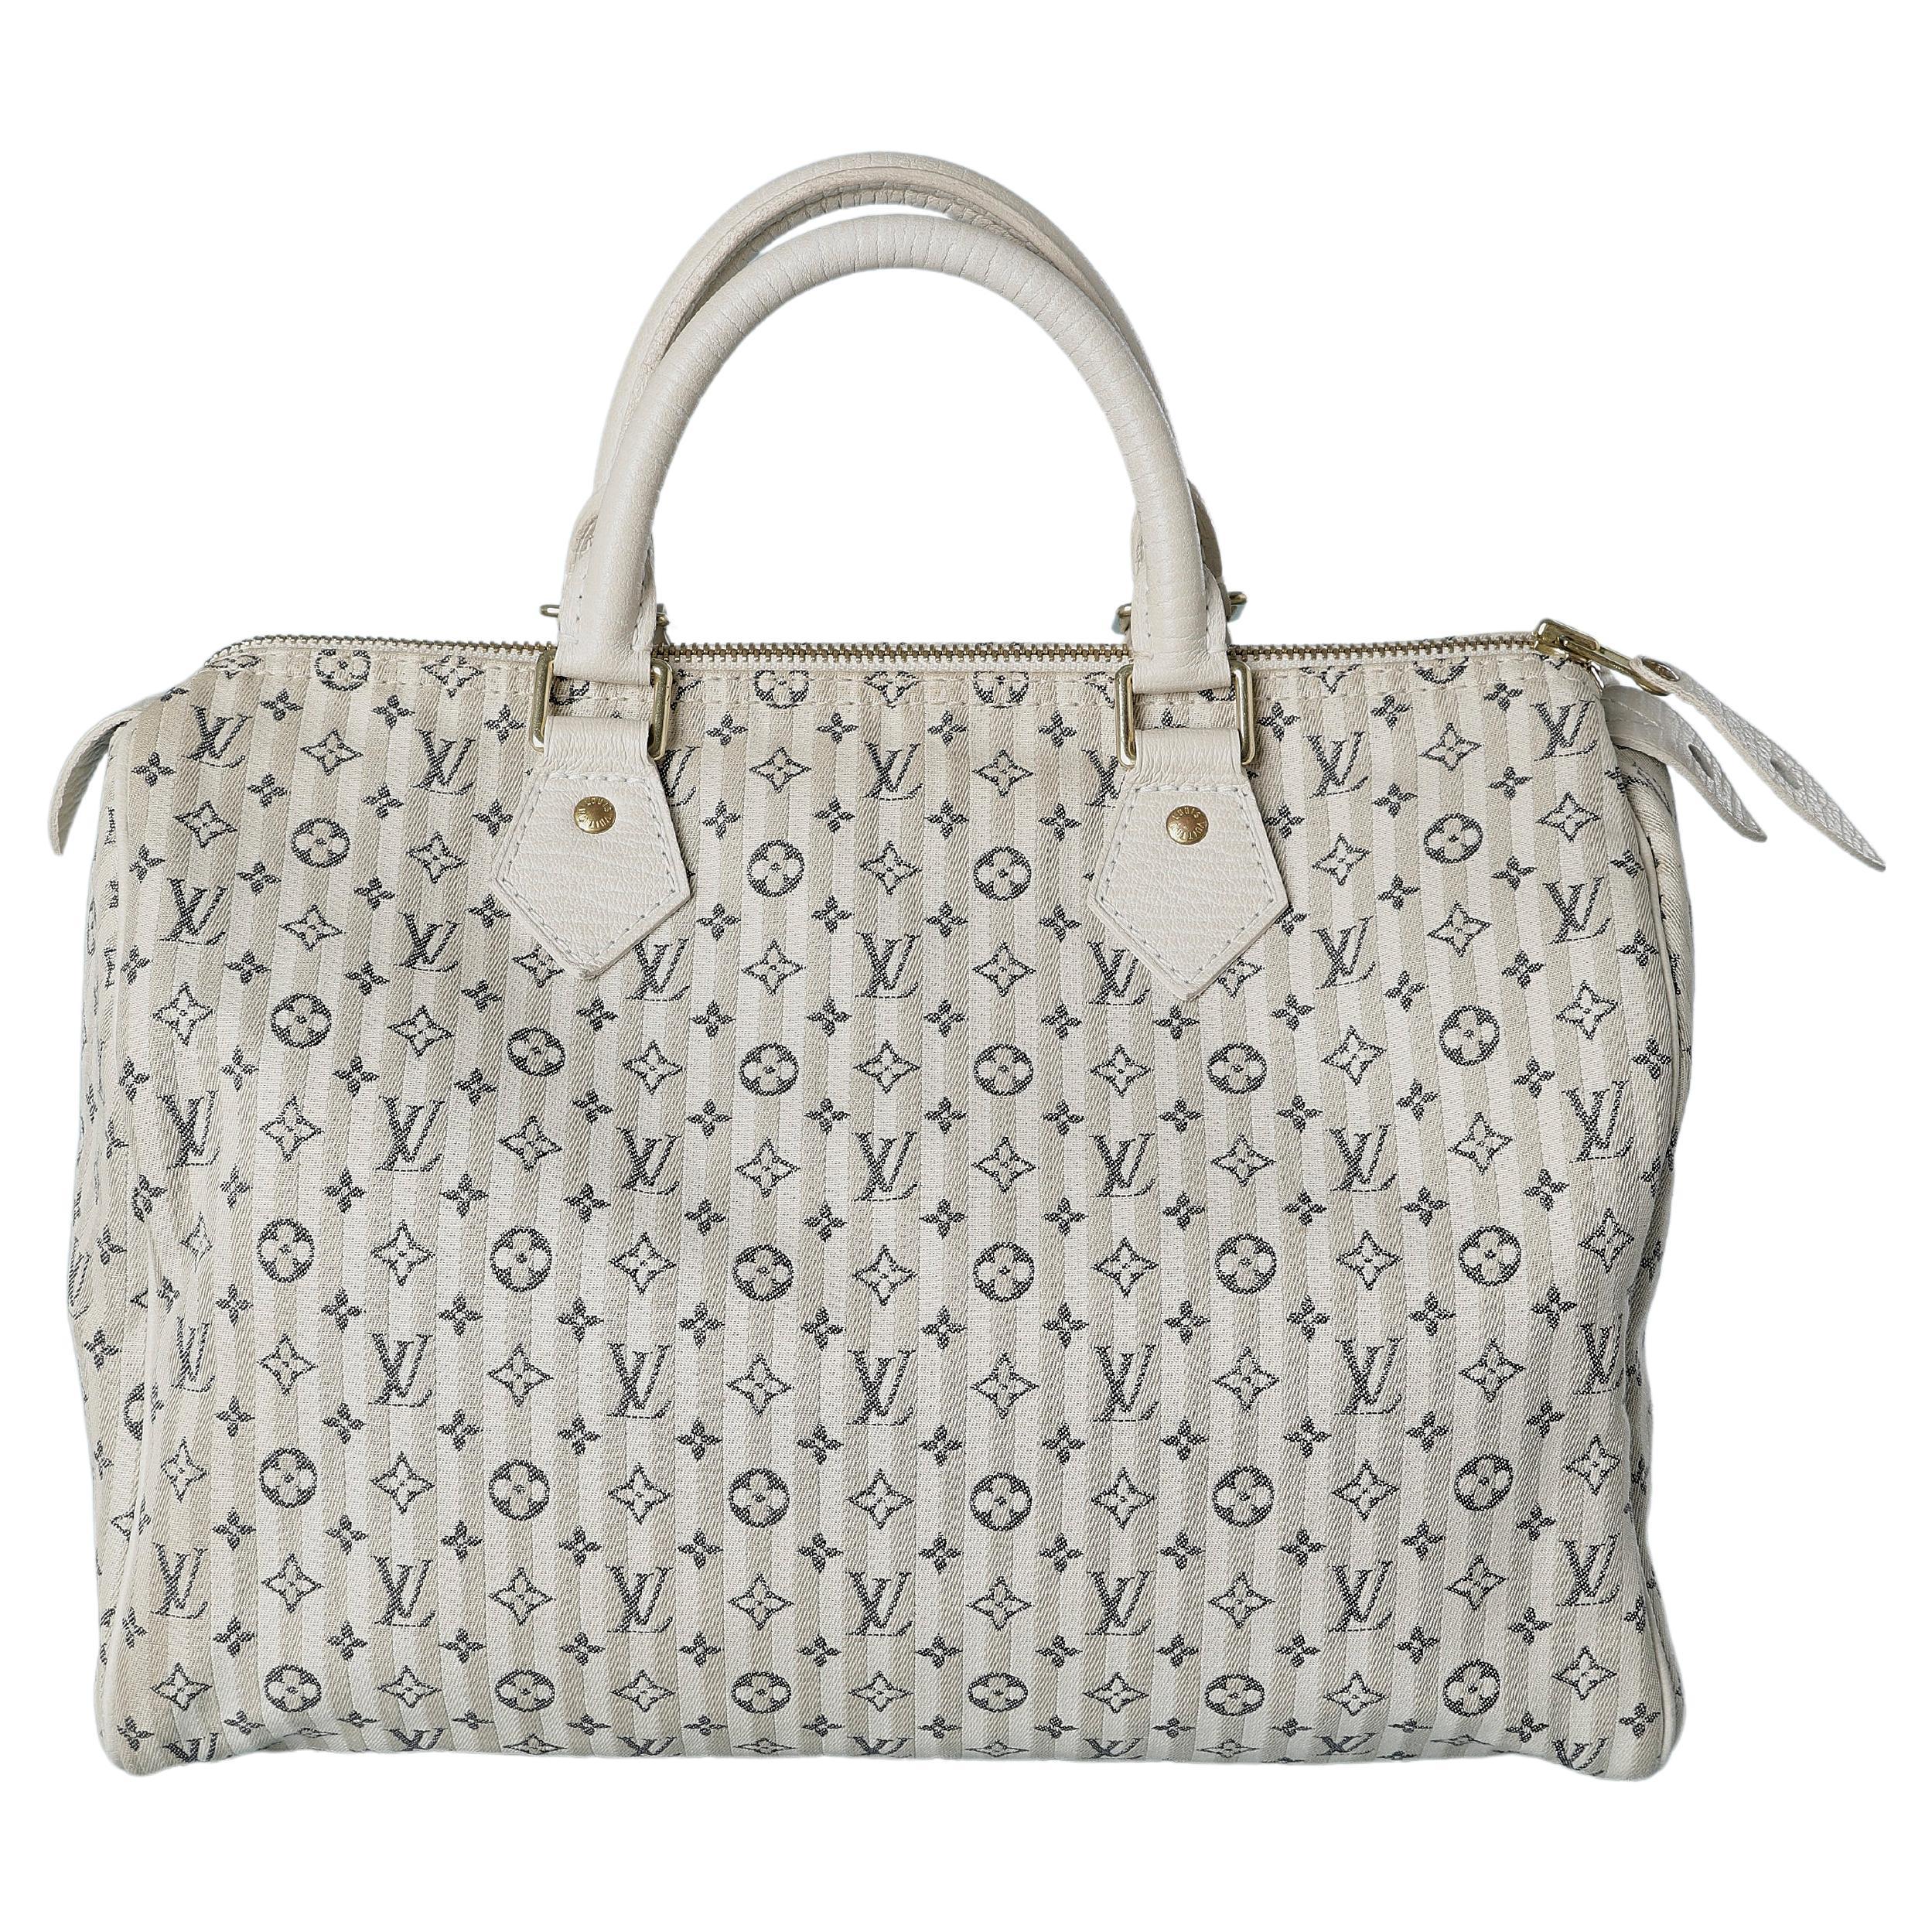 Off-white and beige Speedy hand-bag in cotton jacquard Louis Vuitton "Croisette"